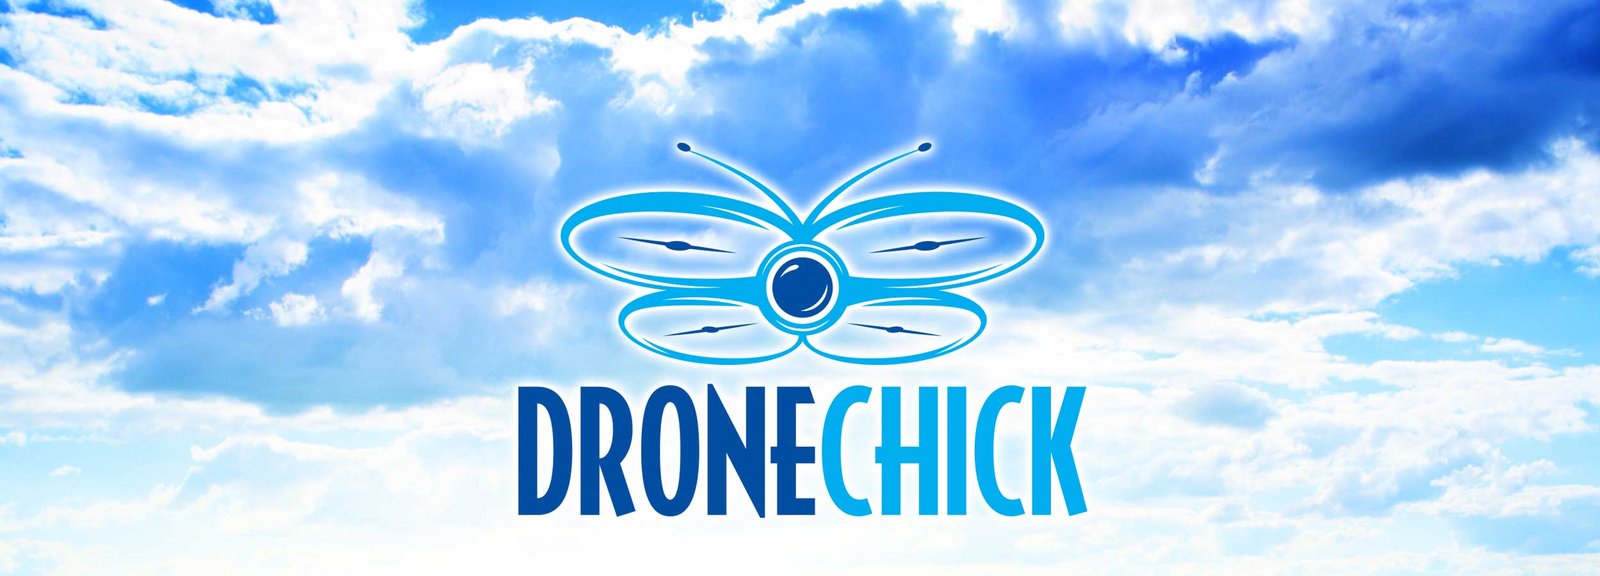 The Drone Chick